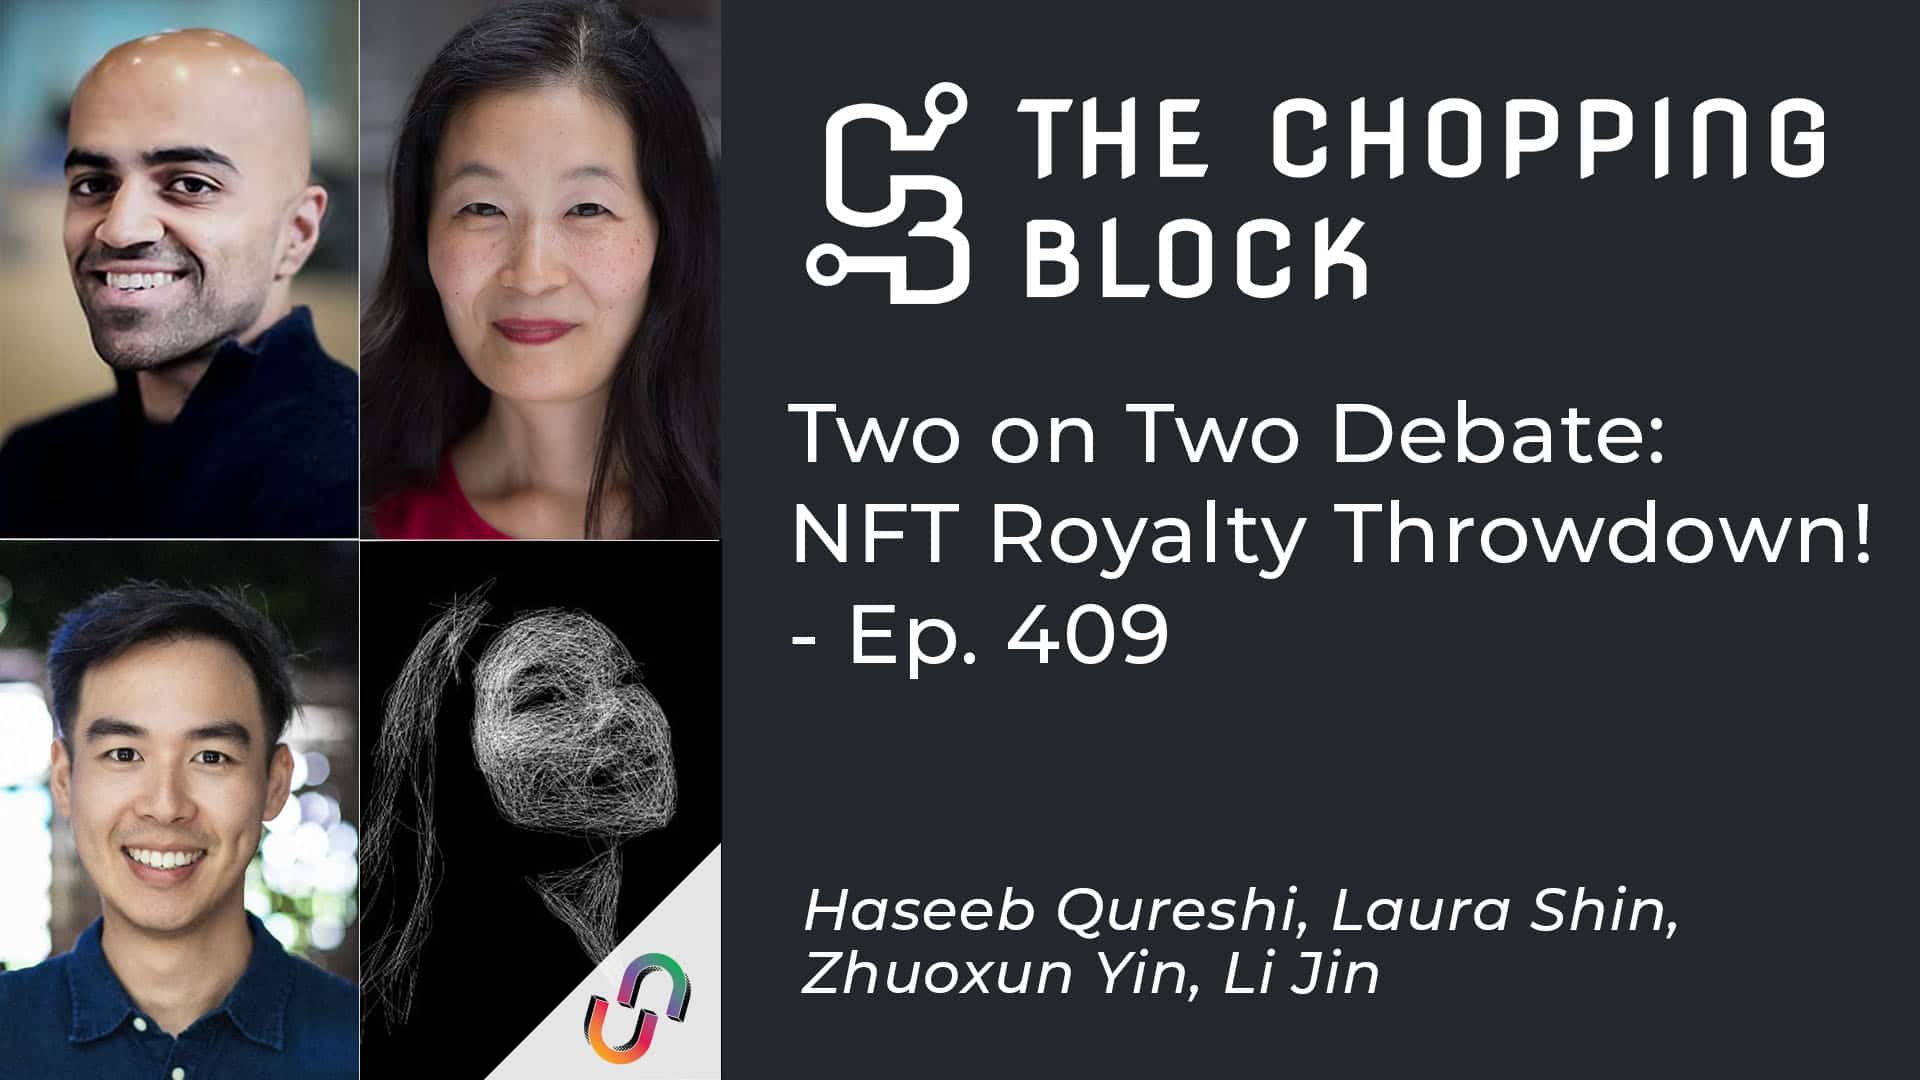 The Chopping Block: Two on Two Debate: NFT Royalty Throwdown! - Ep. 409